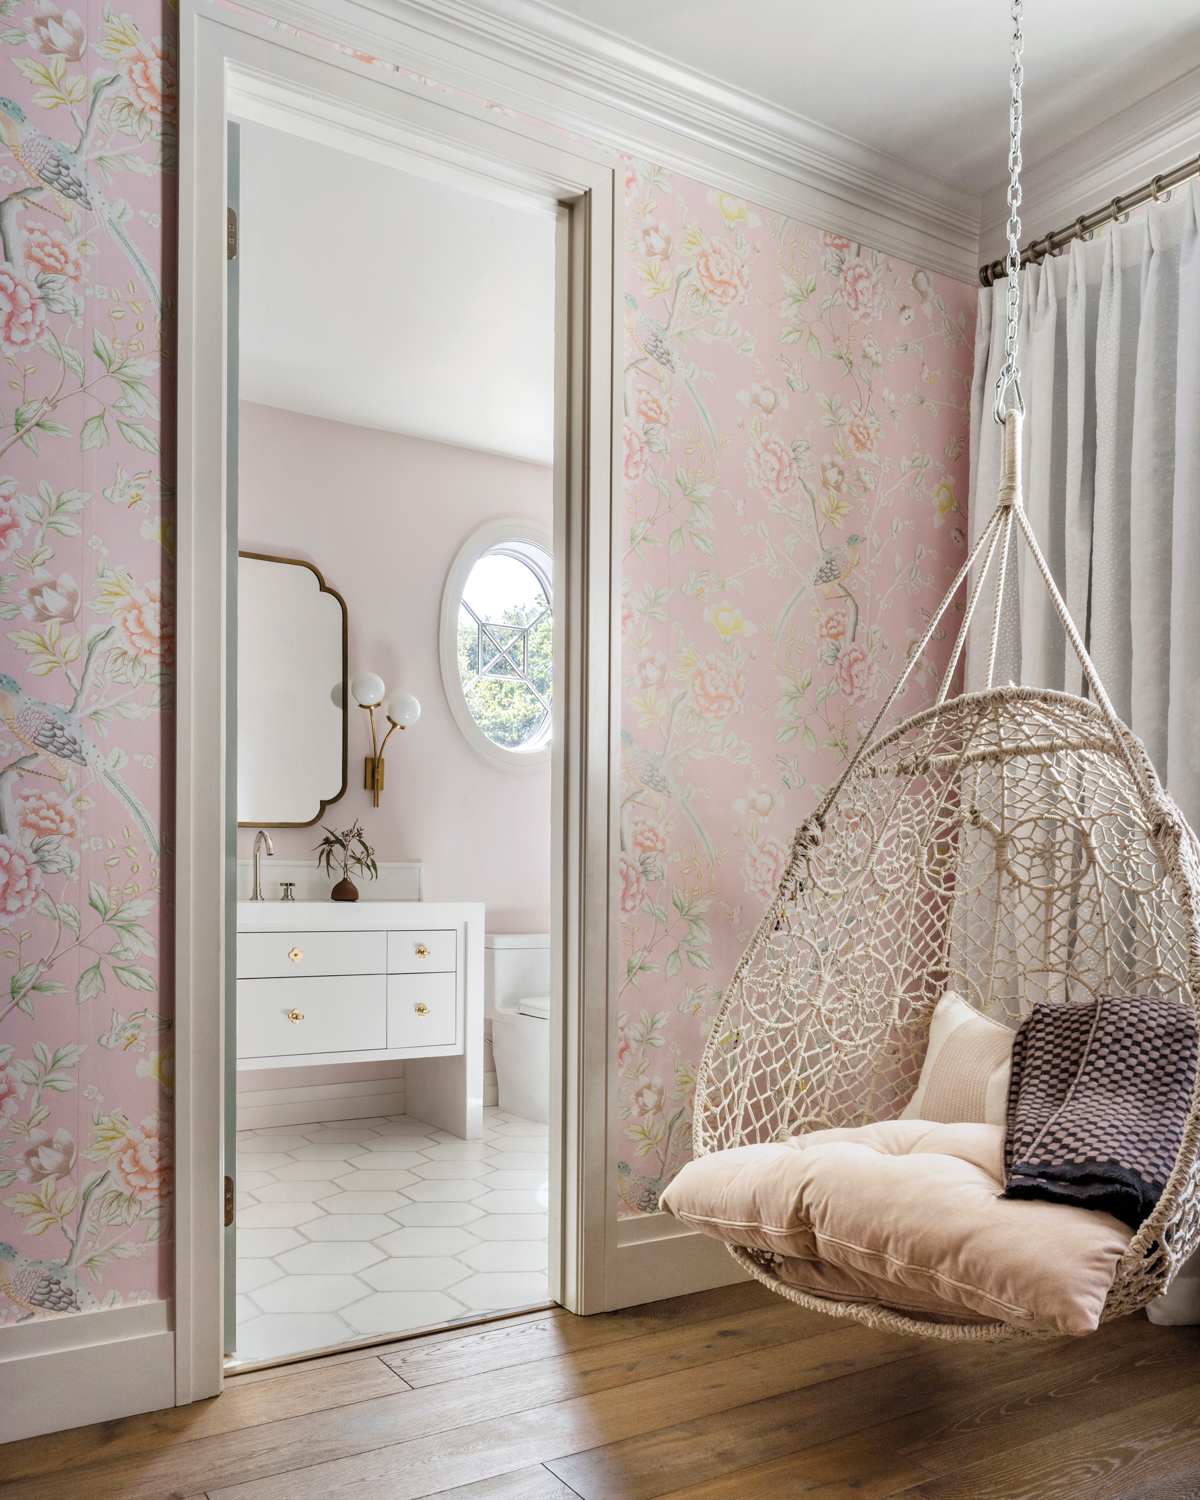 The daughter's room features a hanging chair.